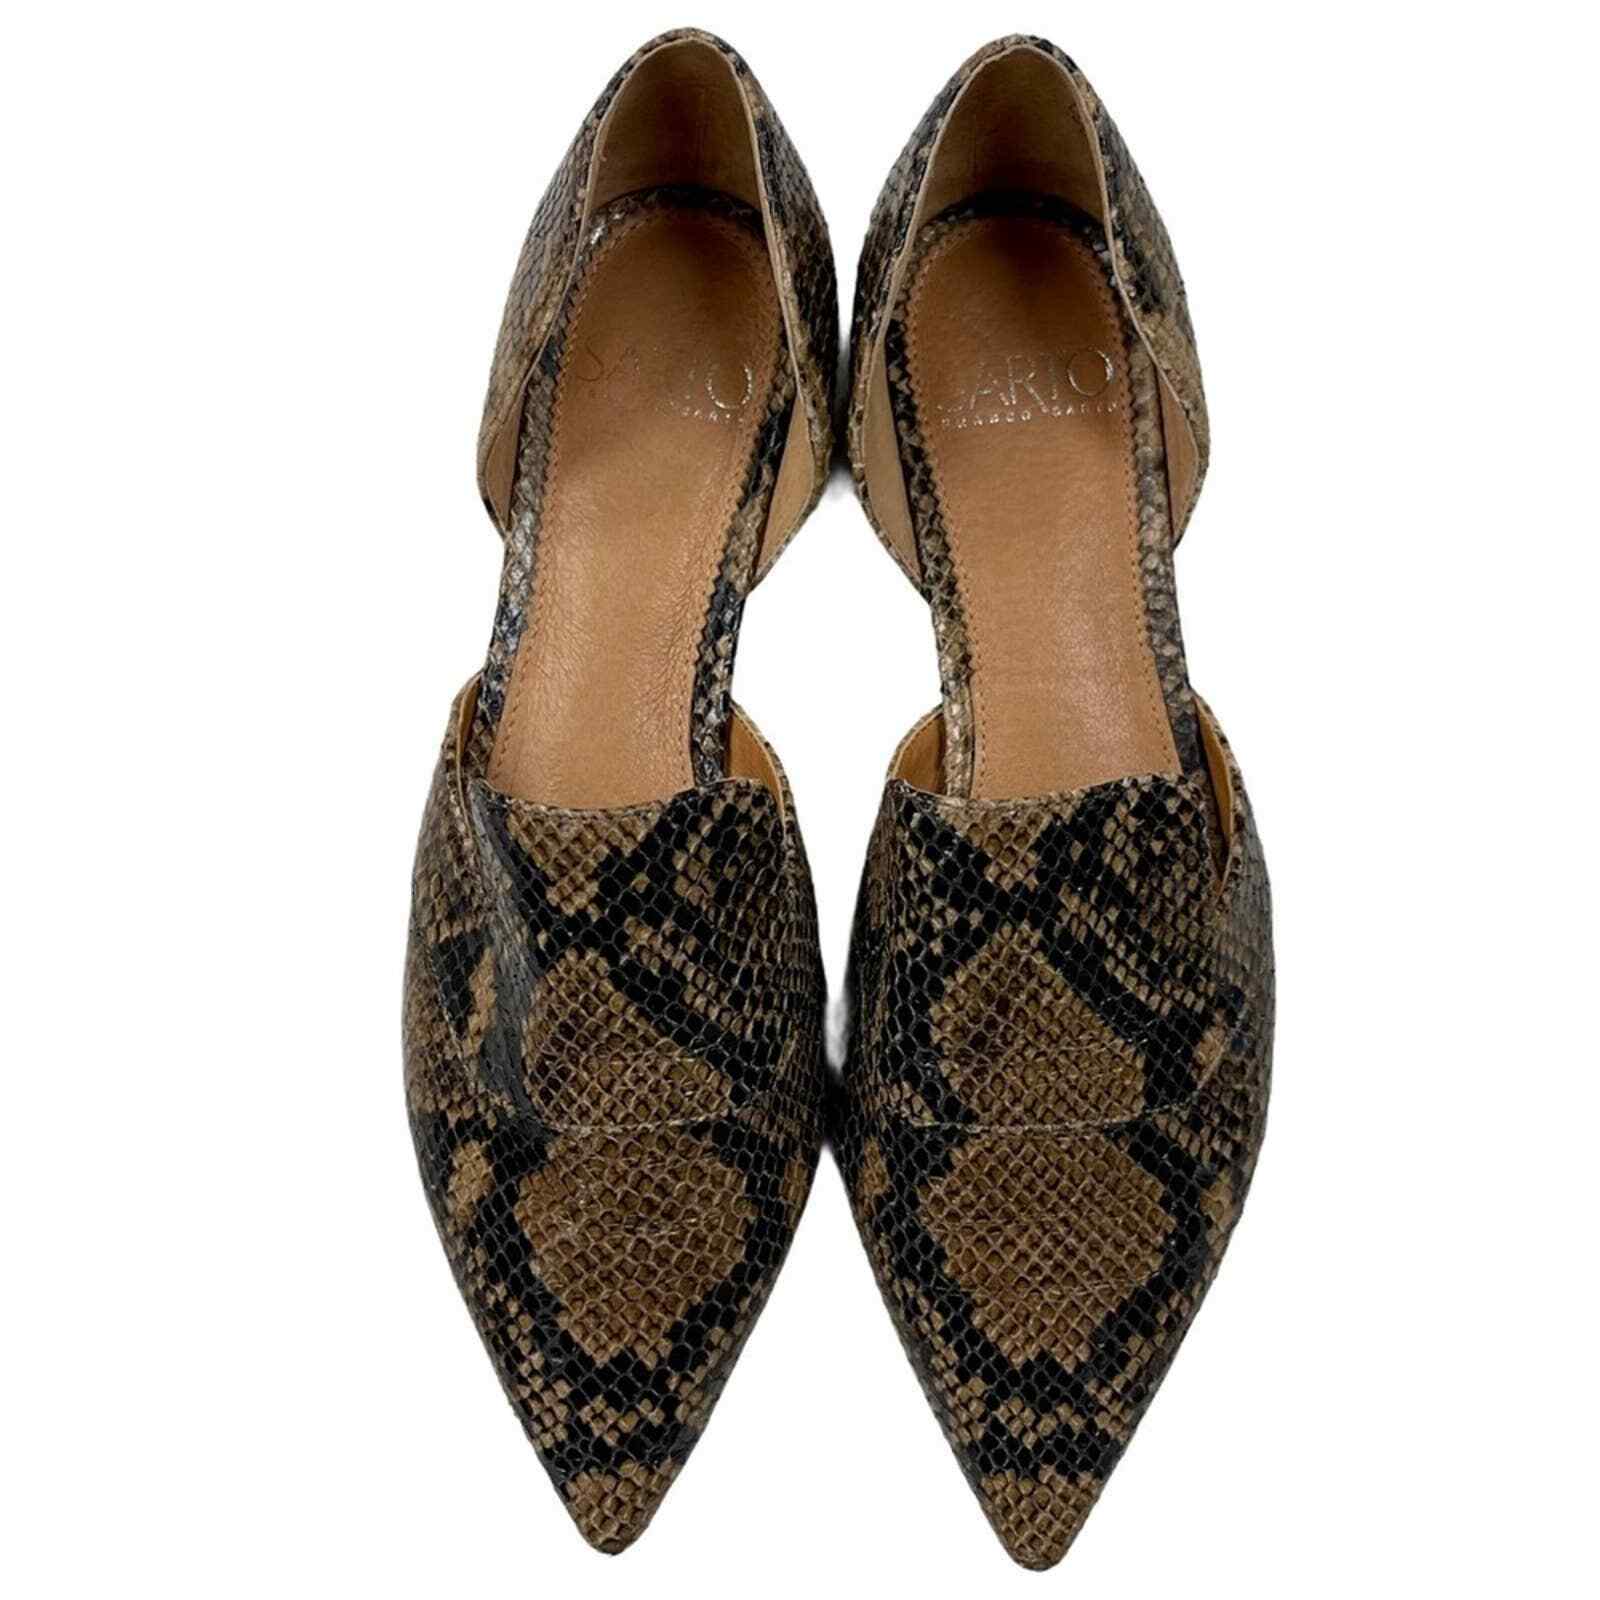 Primary image for Franco Sarto Toby Pointed Toe Flat